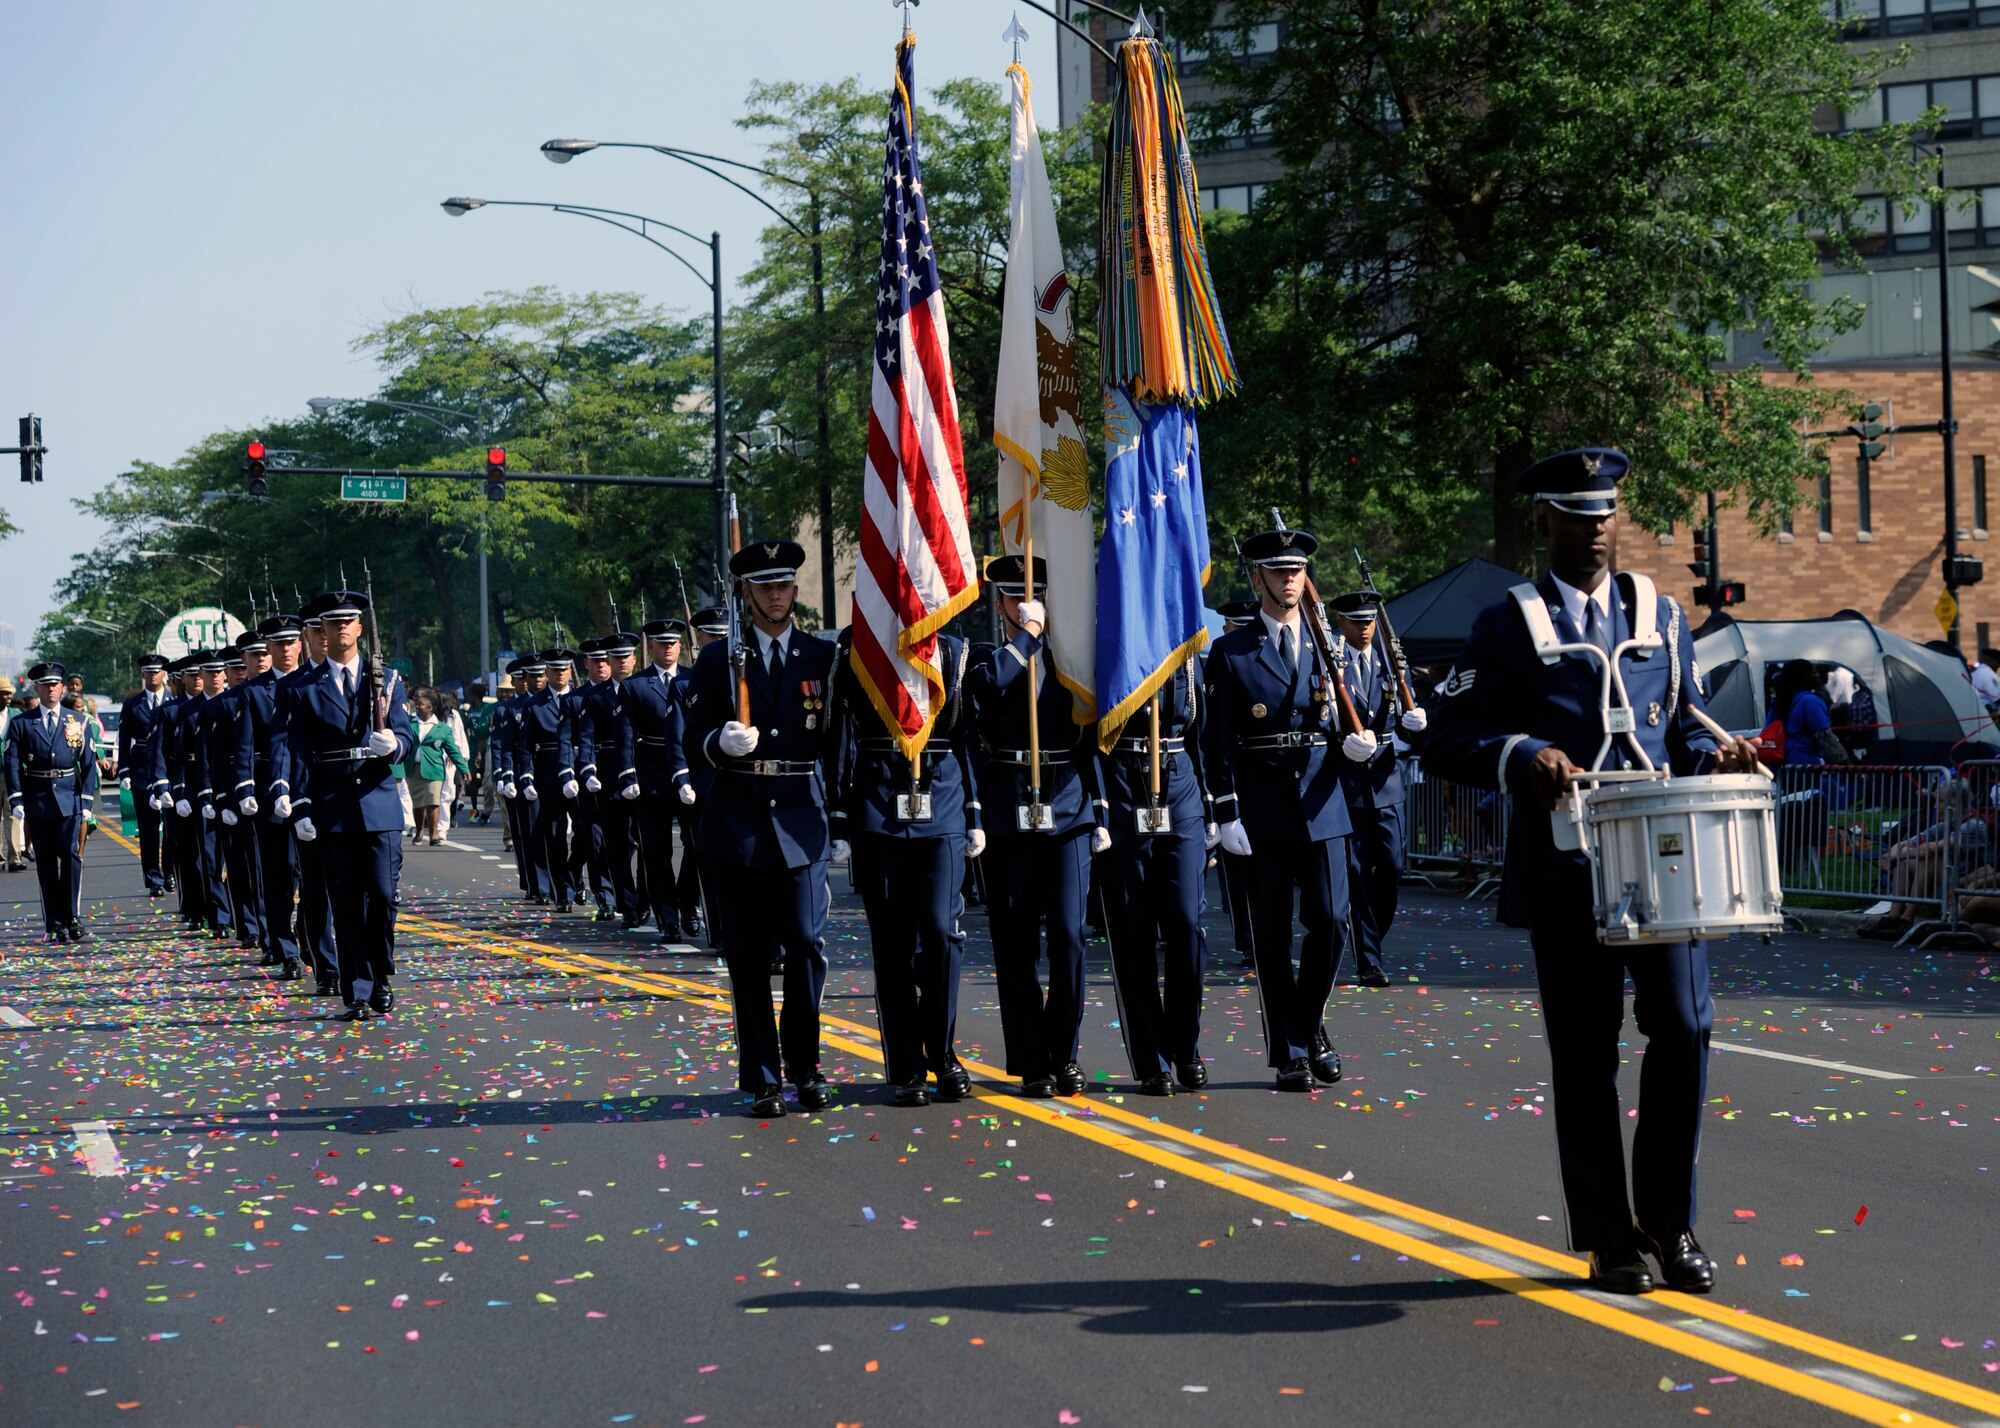 The United States Air Force Color Team leads the ceremonial guardsmen during the Bud Billiken Parade in Chicago, Il., August 9, 2014.  The USAF Honor Guard marched in front of a live and televised audience of millions of people. (U.S. Air Force photo/ Senior Airman Nesha Humes)